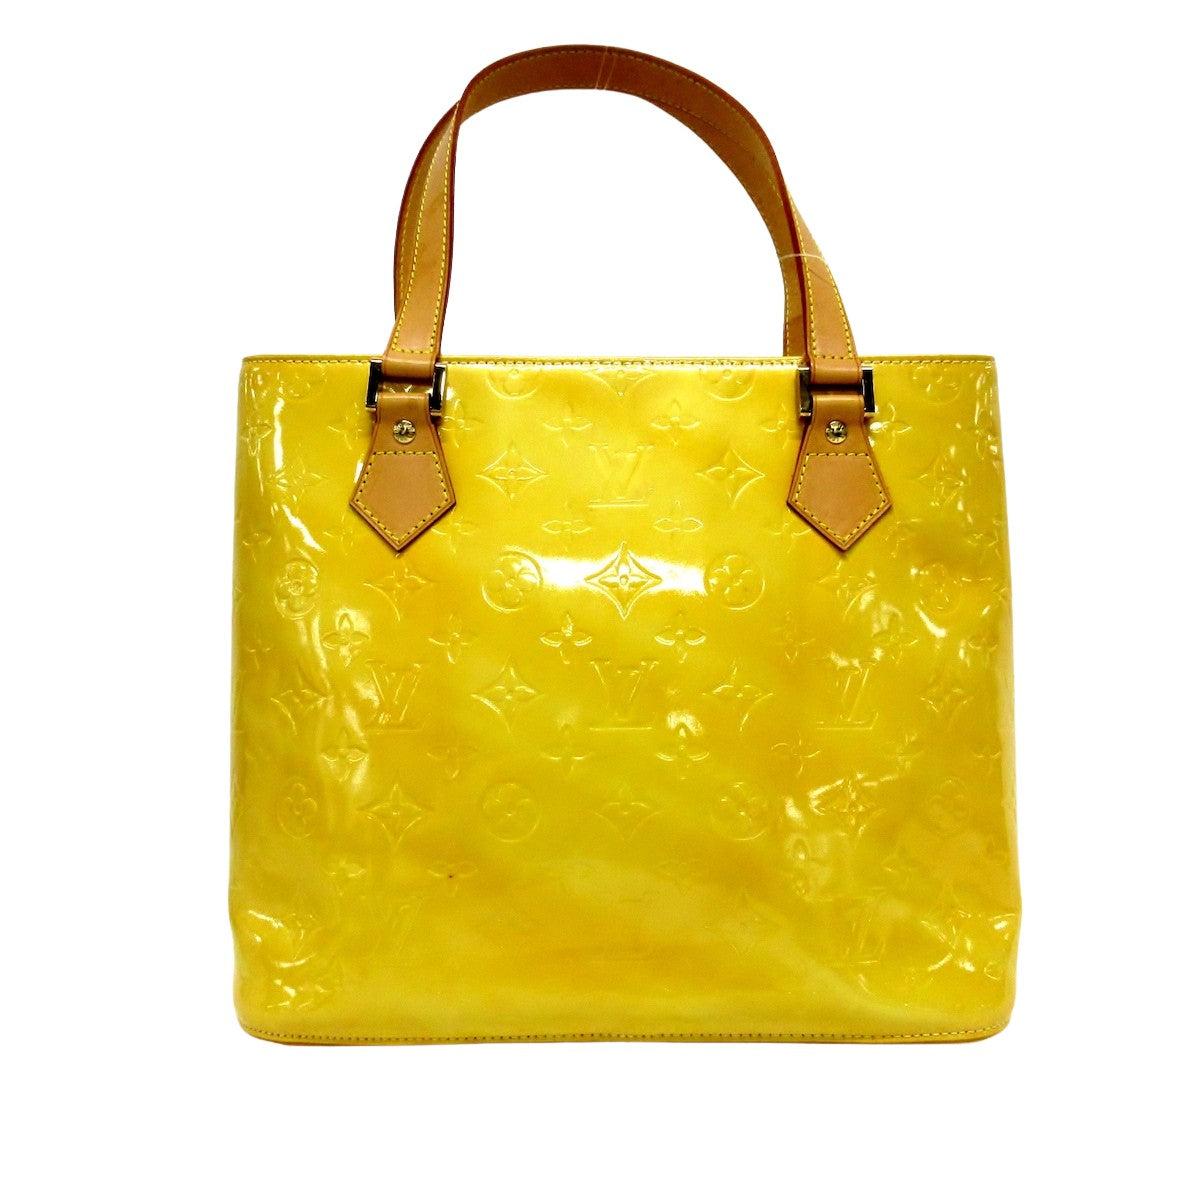 Louis Vuitton Thompson Street Yellow Patent Leather Shoulder Bag (Pre-Owned)